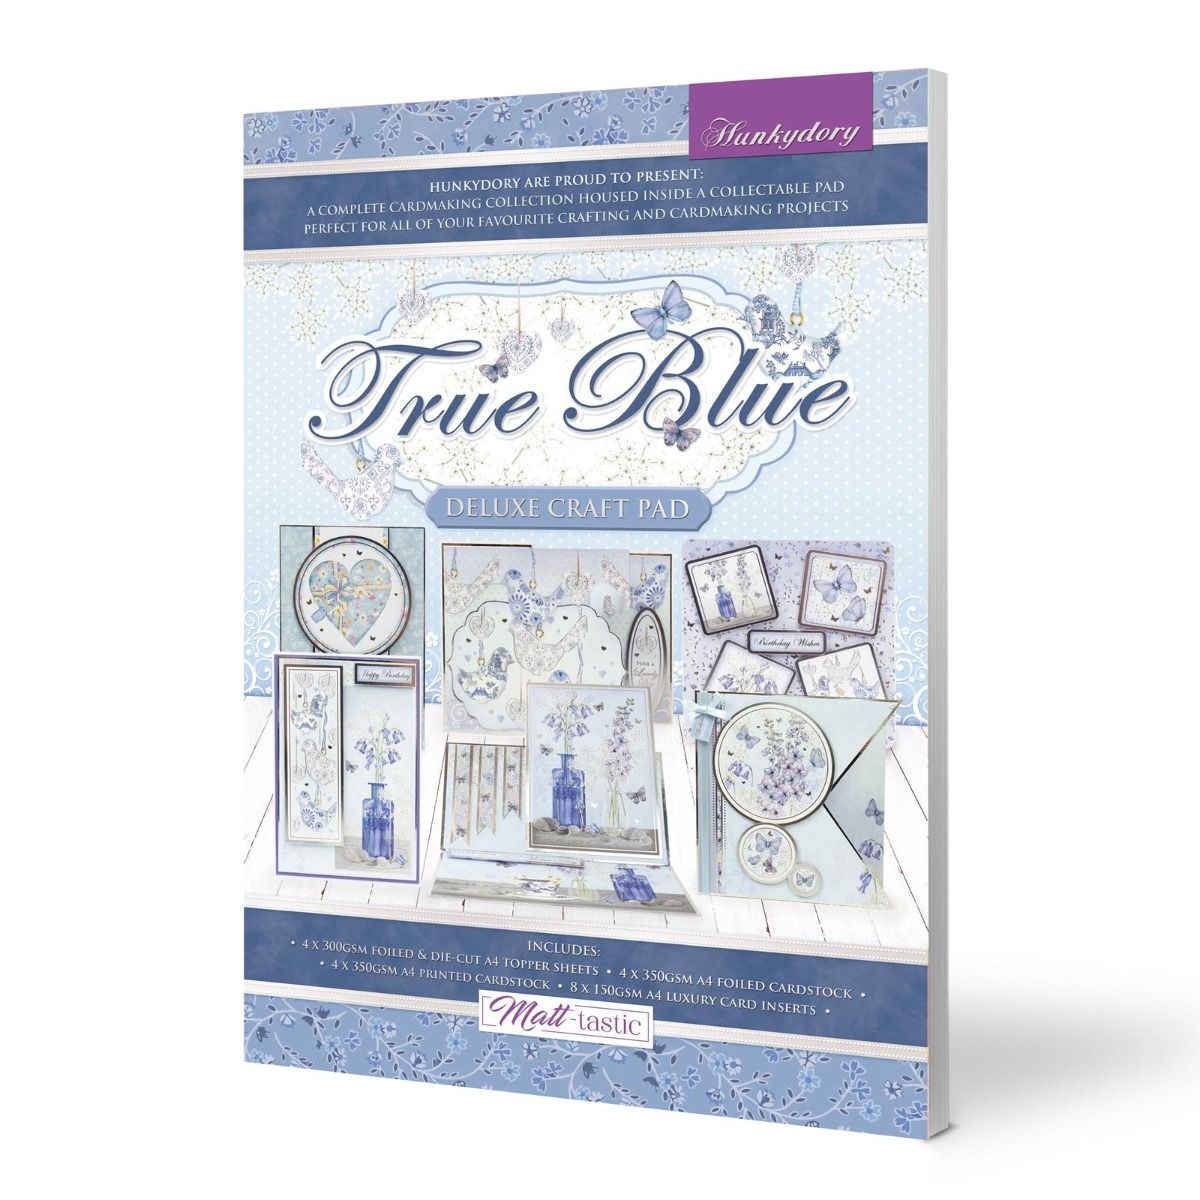 Die Cut Topper Set - Deluxe Craft Pad - True Blue (20 Sheets)